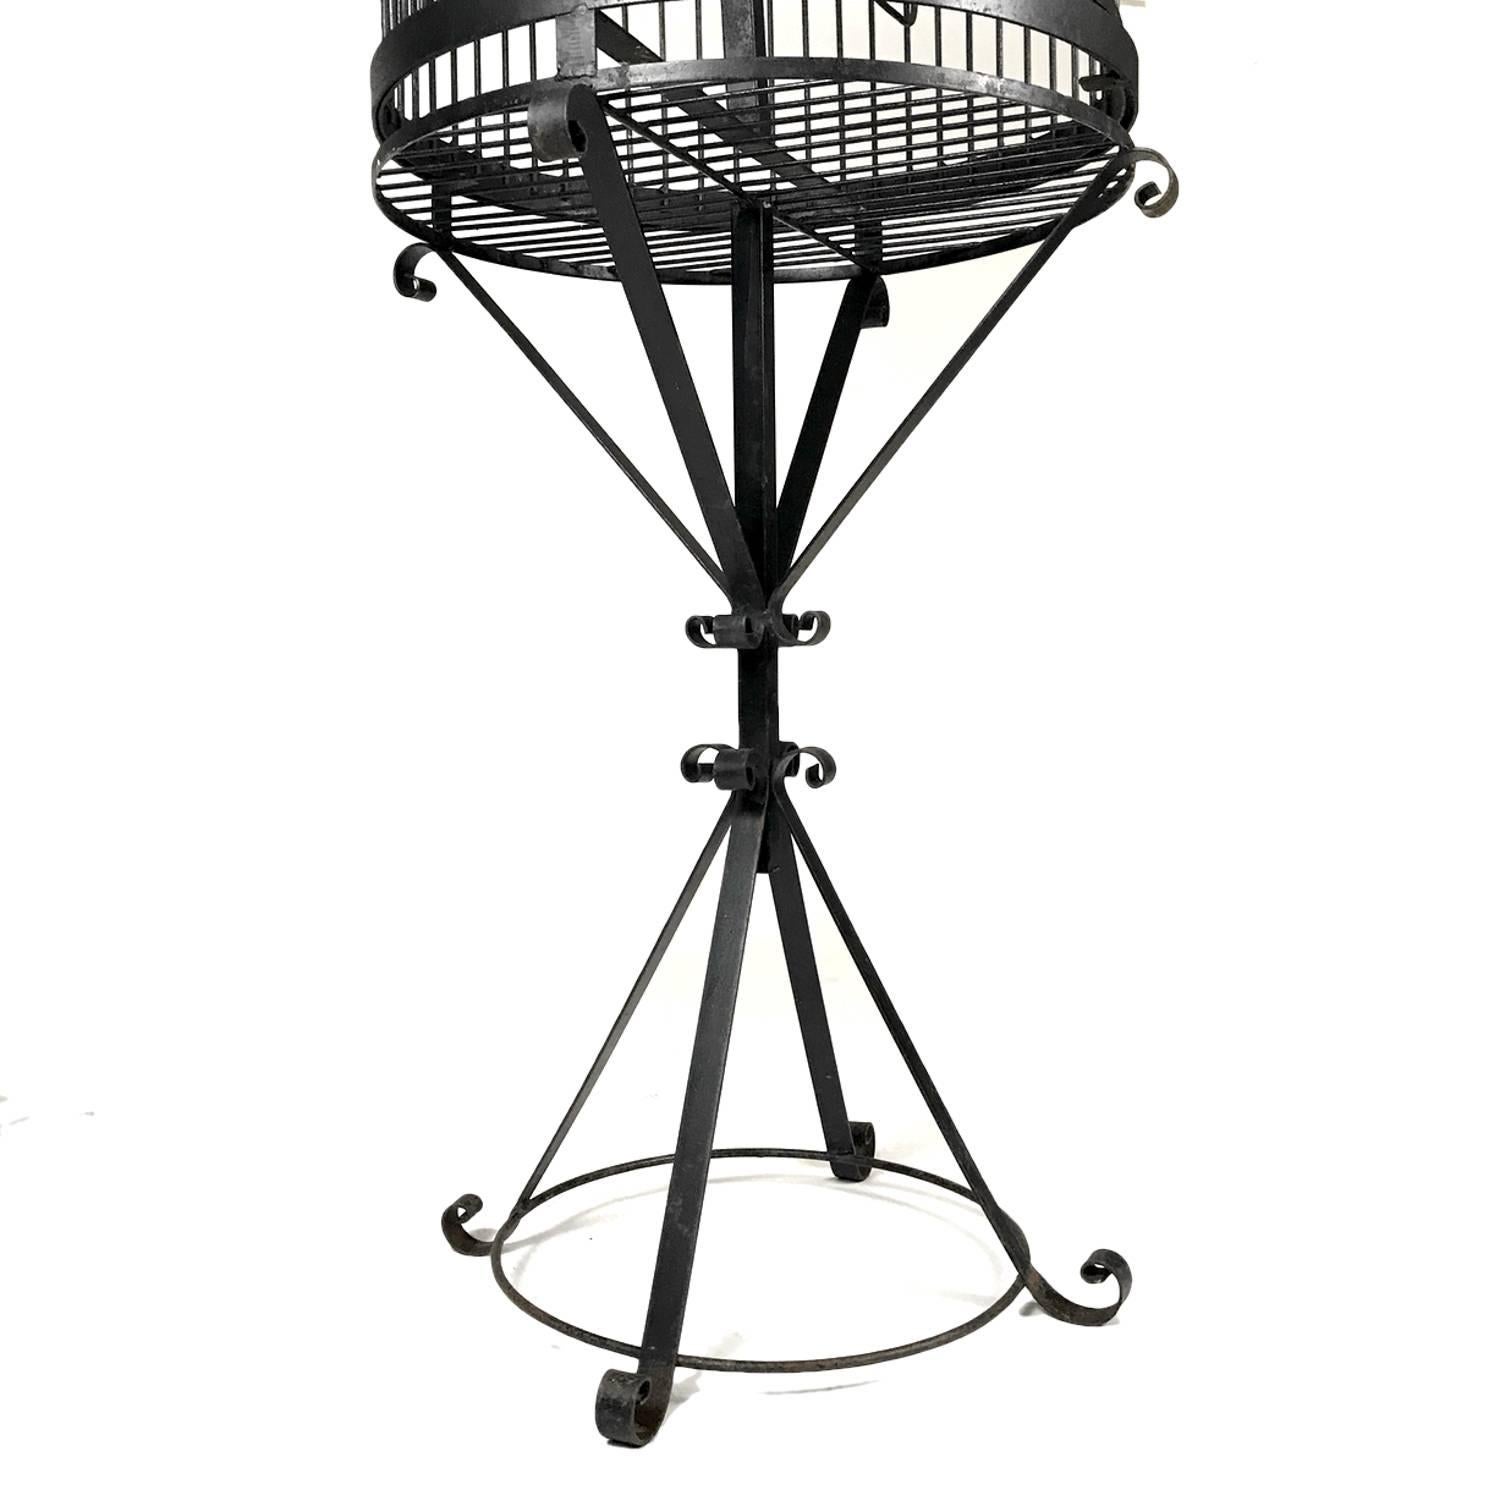 Arts and Crafts Monumental Wrought Iron Parrot Birdcage on Pedestal, Early 20th Century